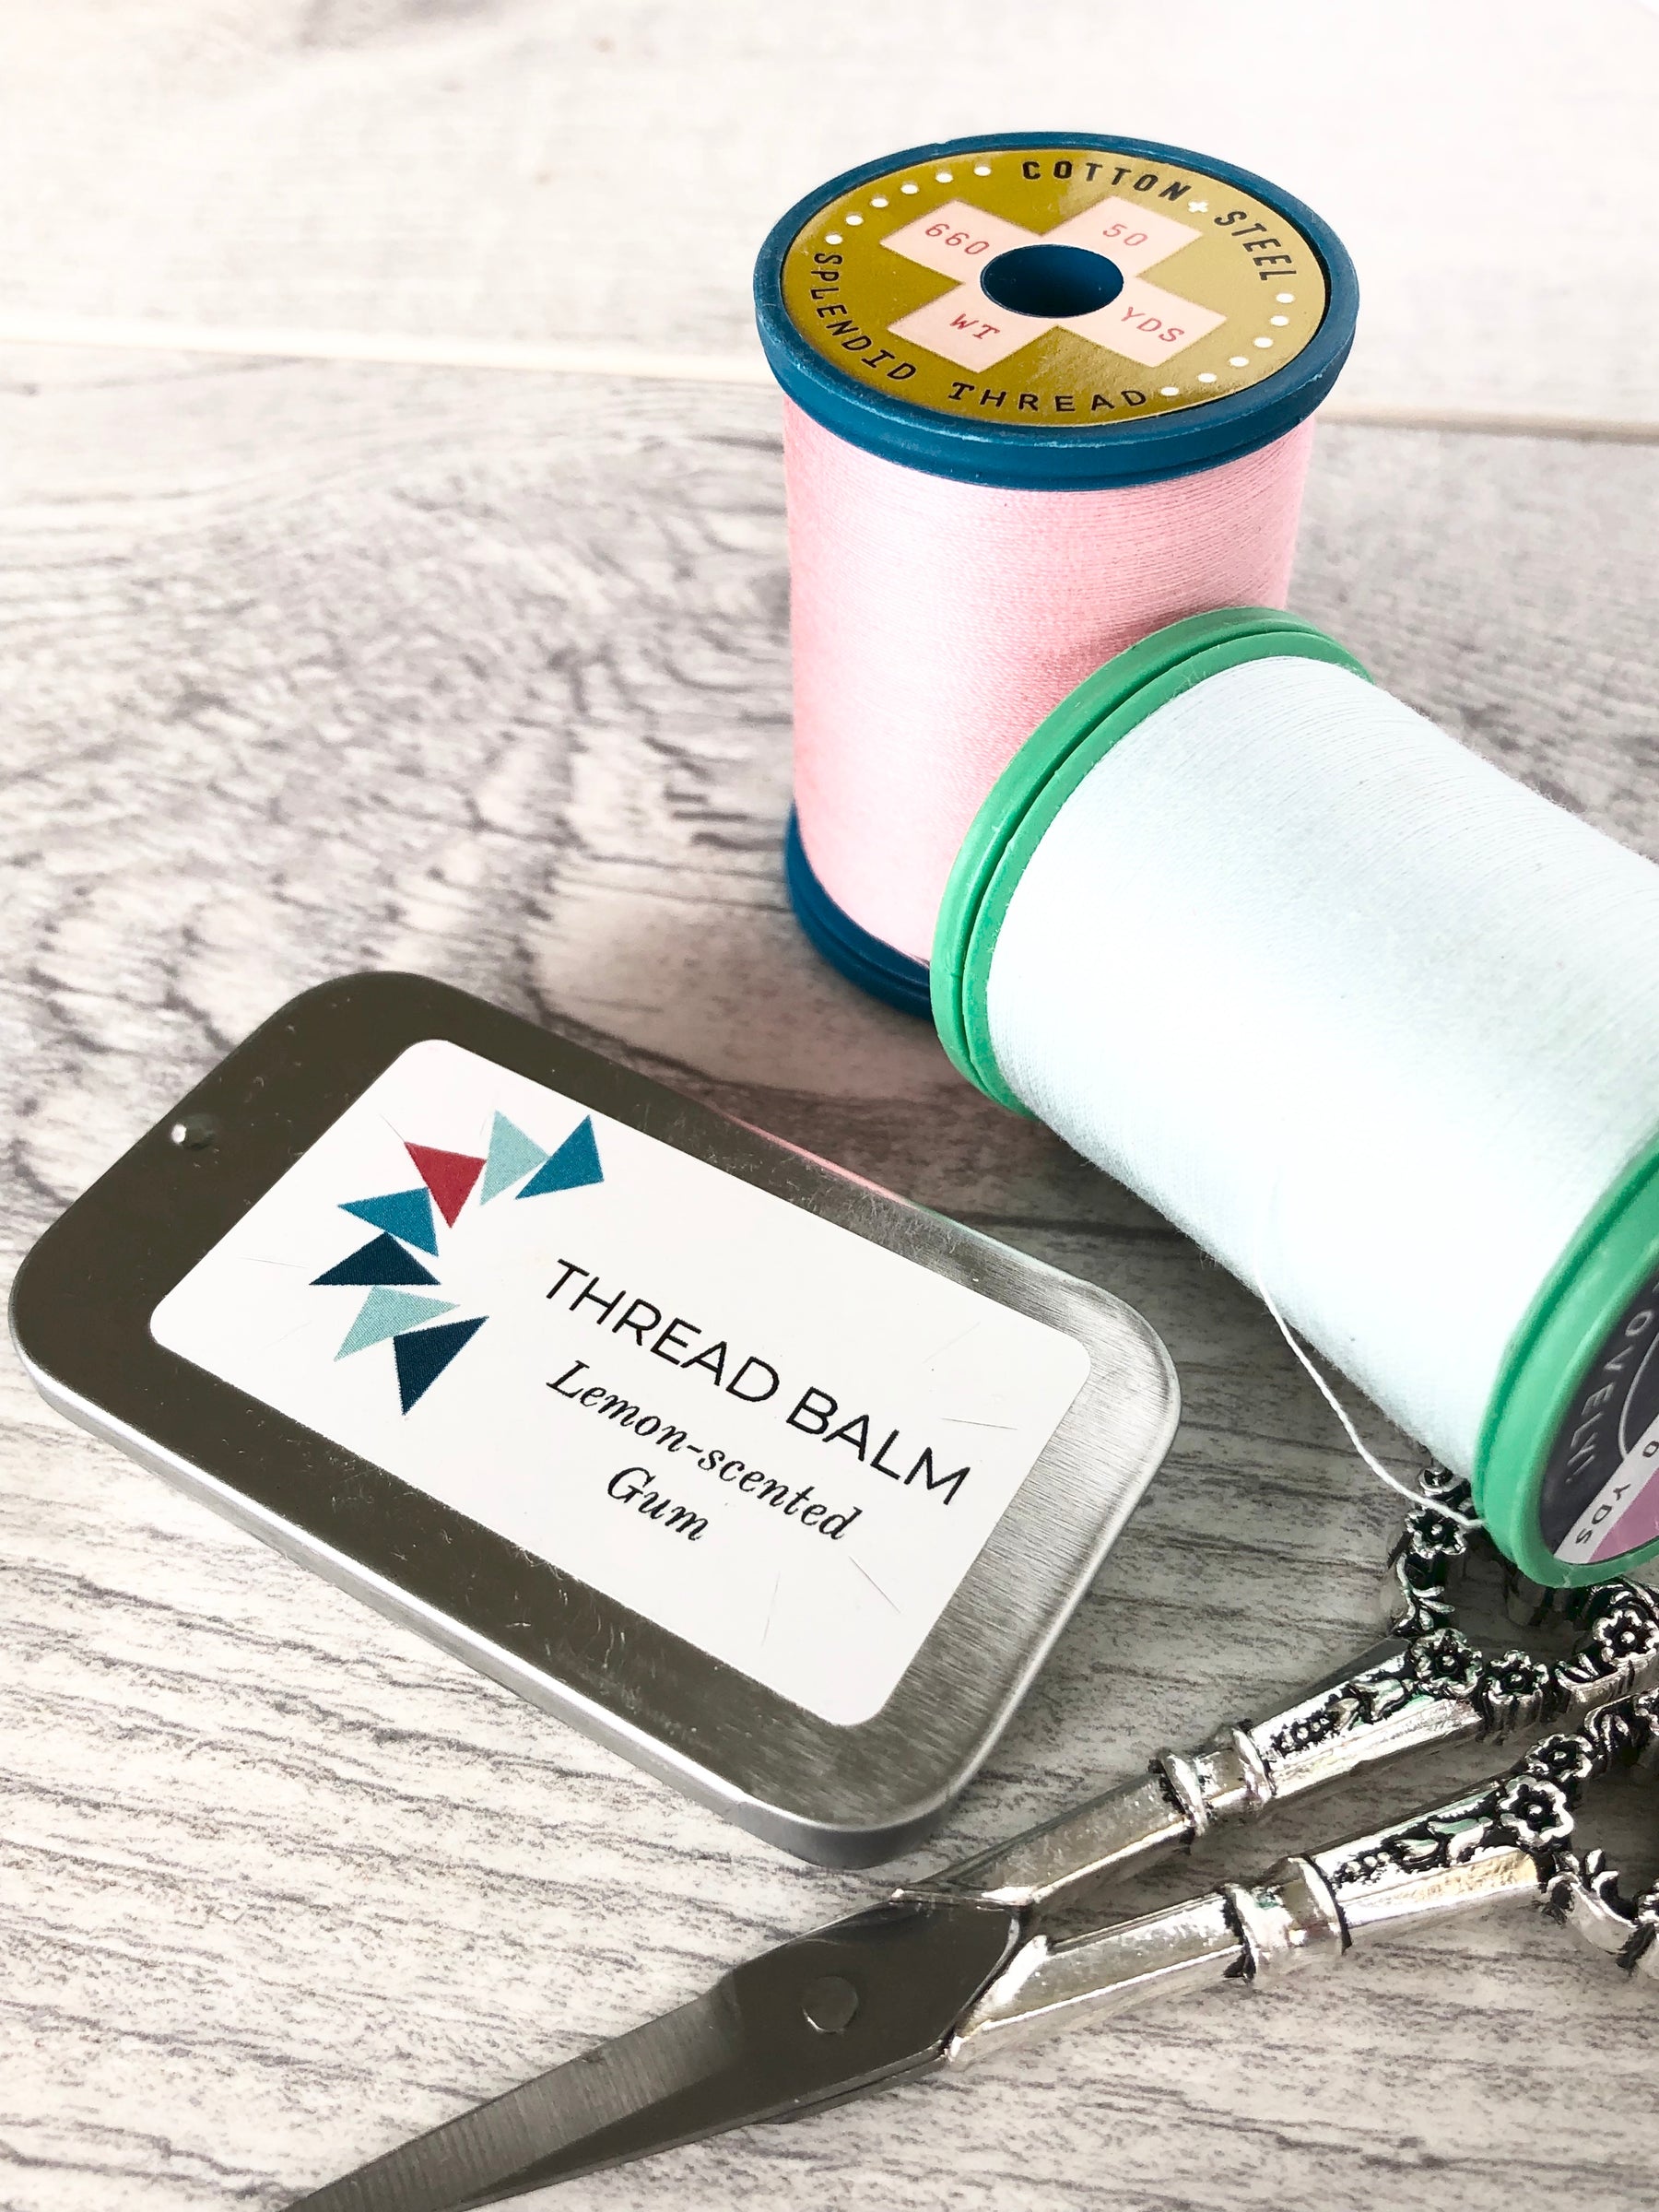 5 reasons why our Thread Balm has become a hit with Australian quilters